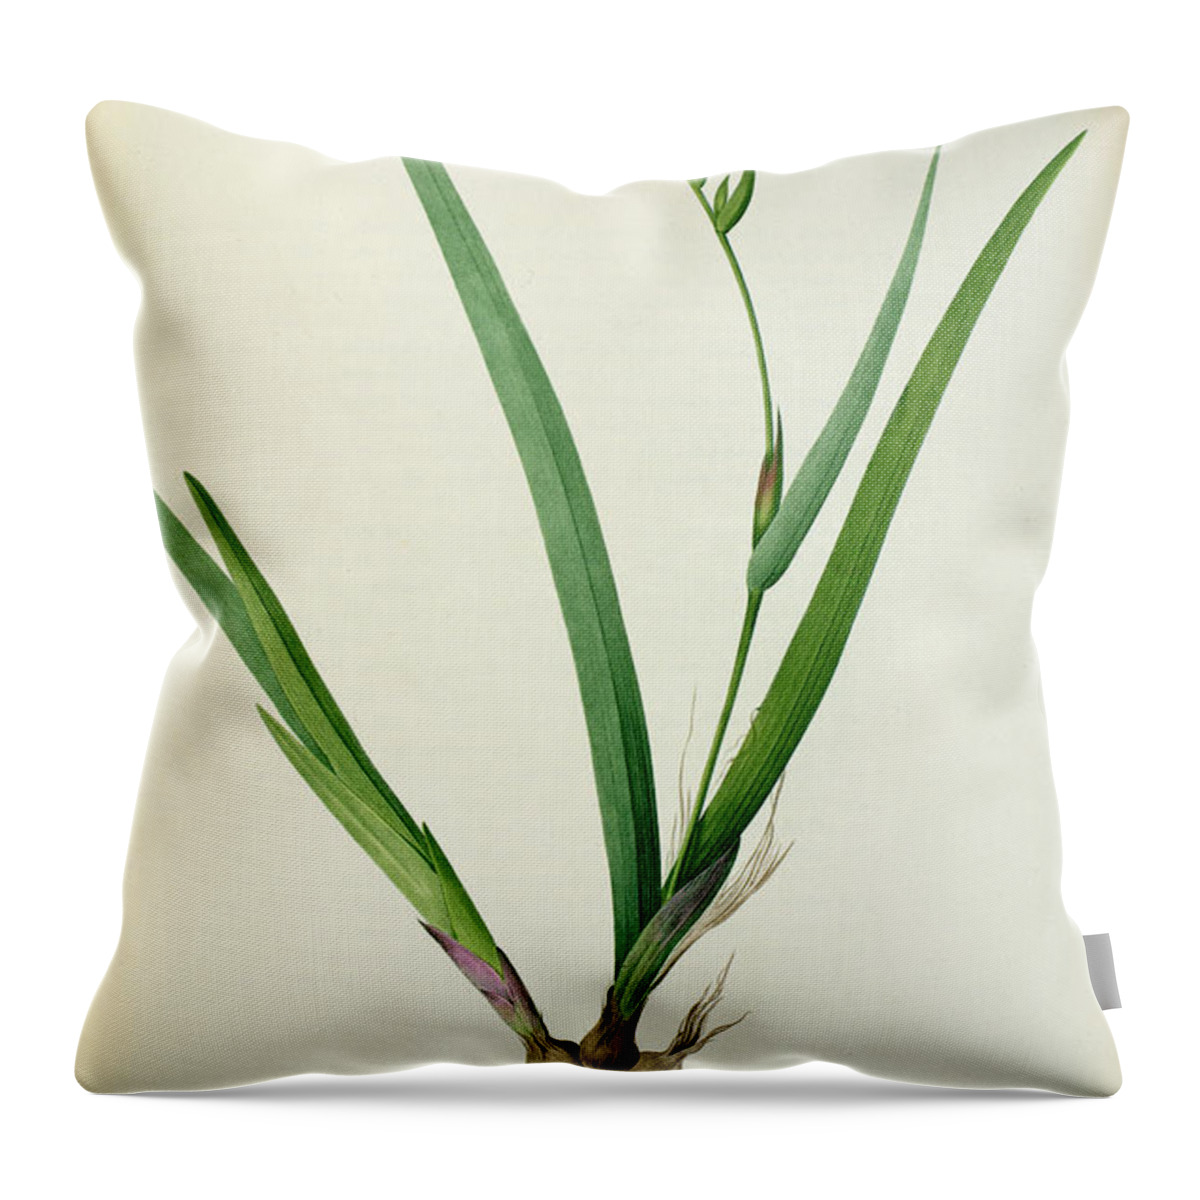 Gladiolus Throw Pillow featuring the drawing Gladiolus Cardinalis by Pierre Joseph Redoute 